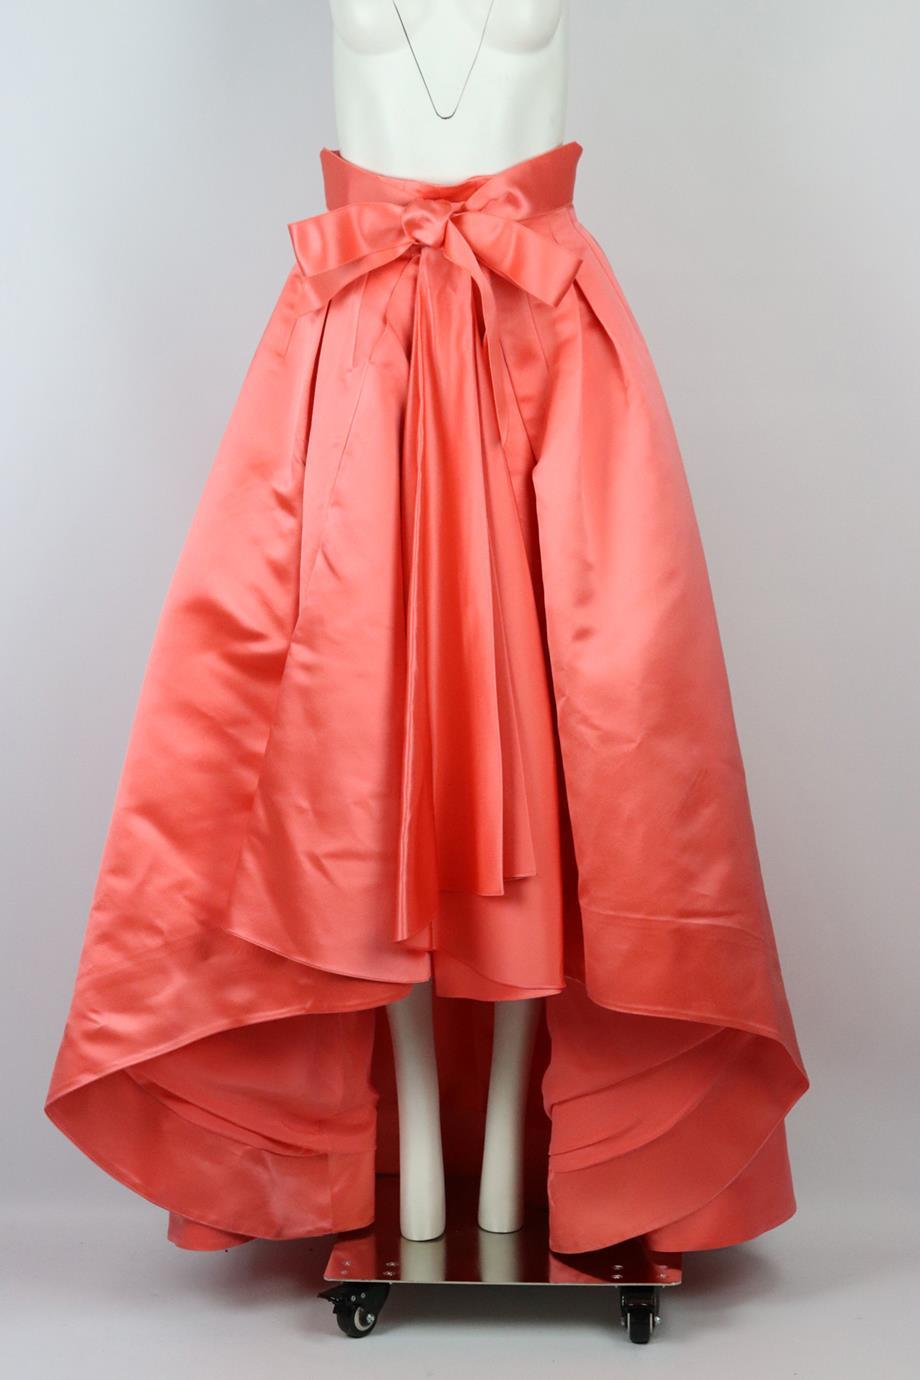 Christian Dior 2013 asymmetric pleated silk satin maxi skirt. Salmon. Zip fastening at back. 100% Silk; lining: 100% silk. Size: FR 38 (UK 10, US 6, IT 42). Waist: 28.2 in. Hips: 78 in. Min. Length: 35 in. Max. Length: 50 in. Very good condition -